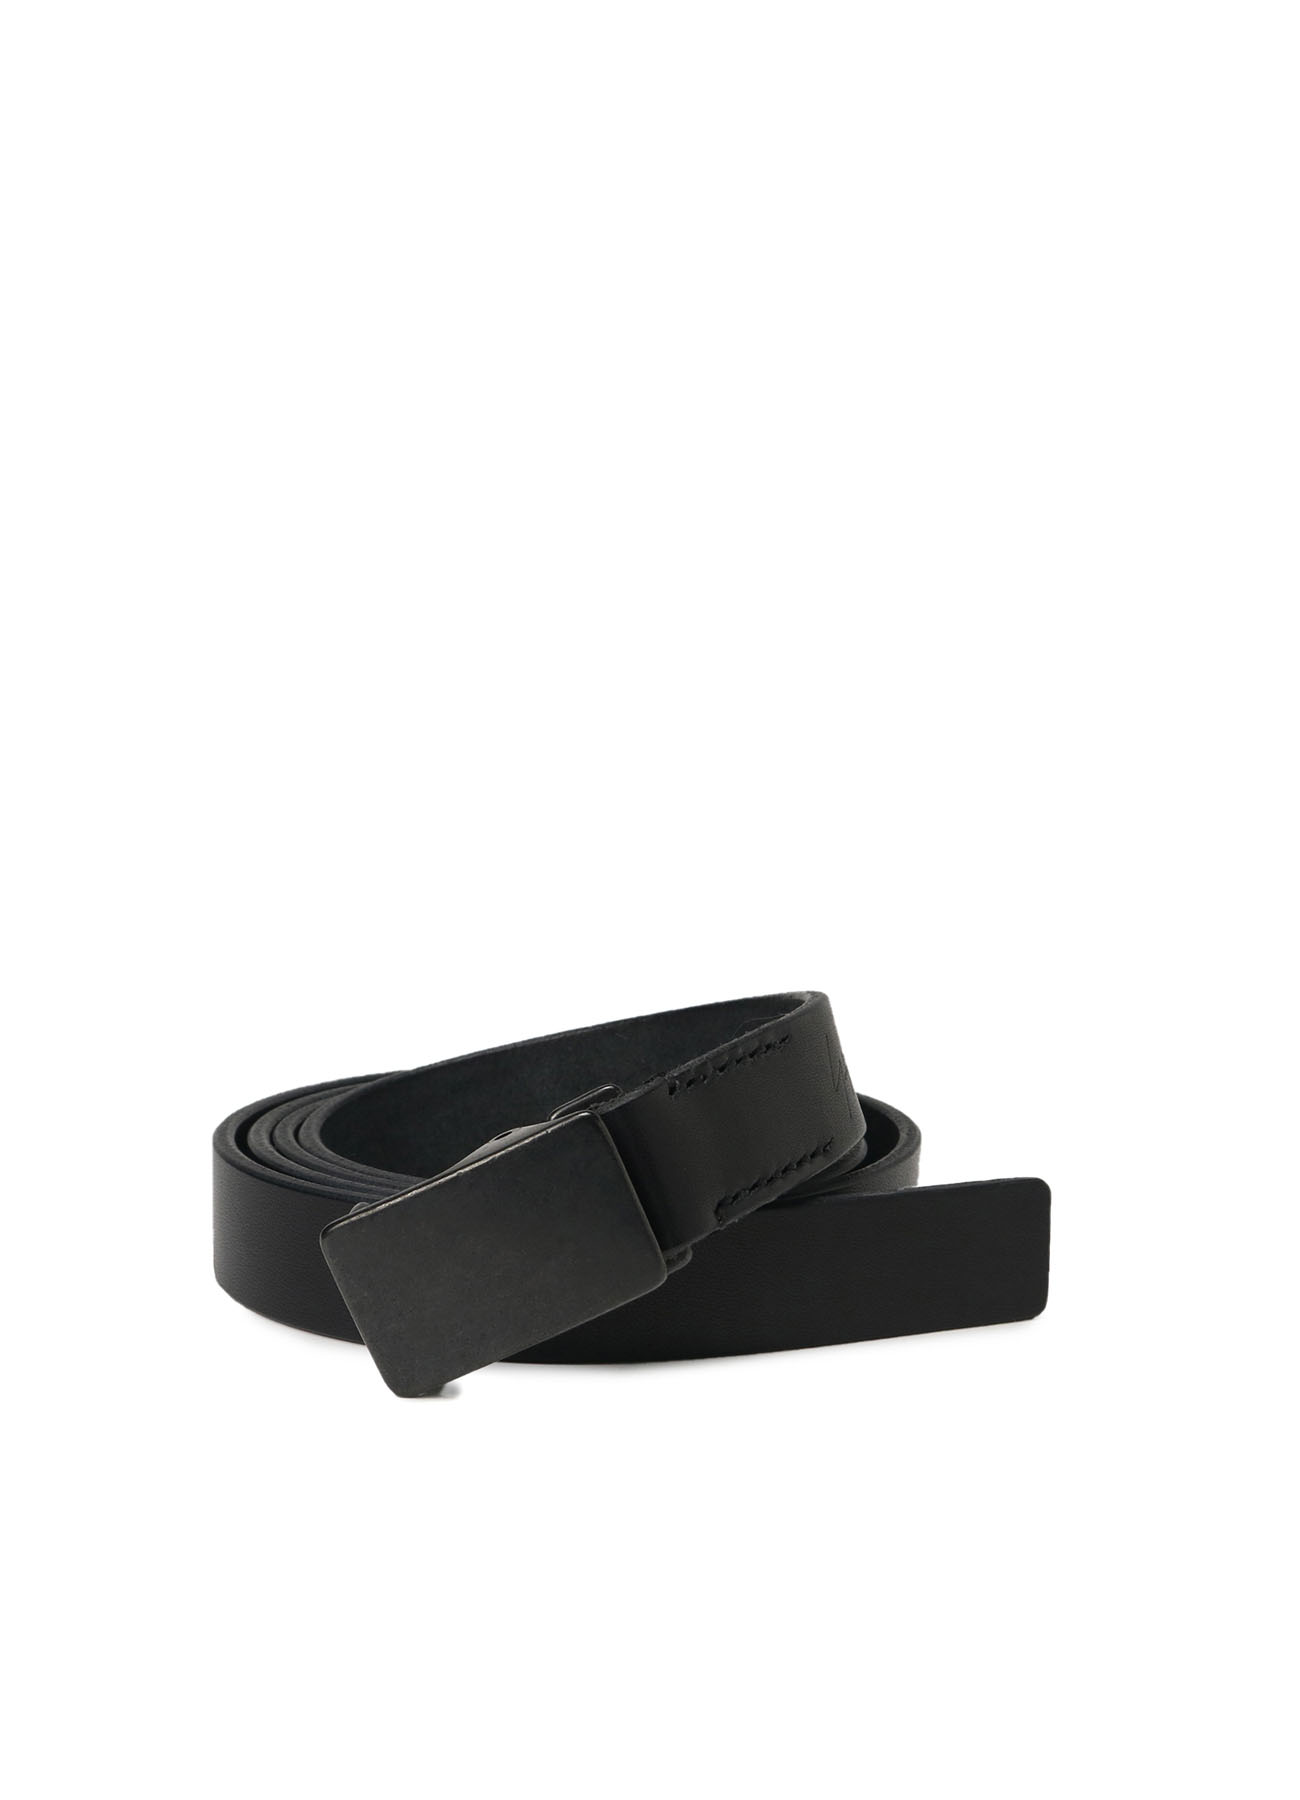 THICK SOFT LEATHER 24MM FREE BELT